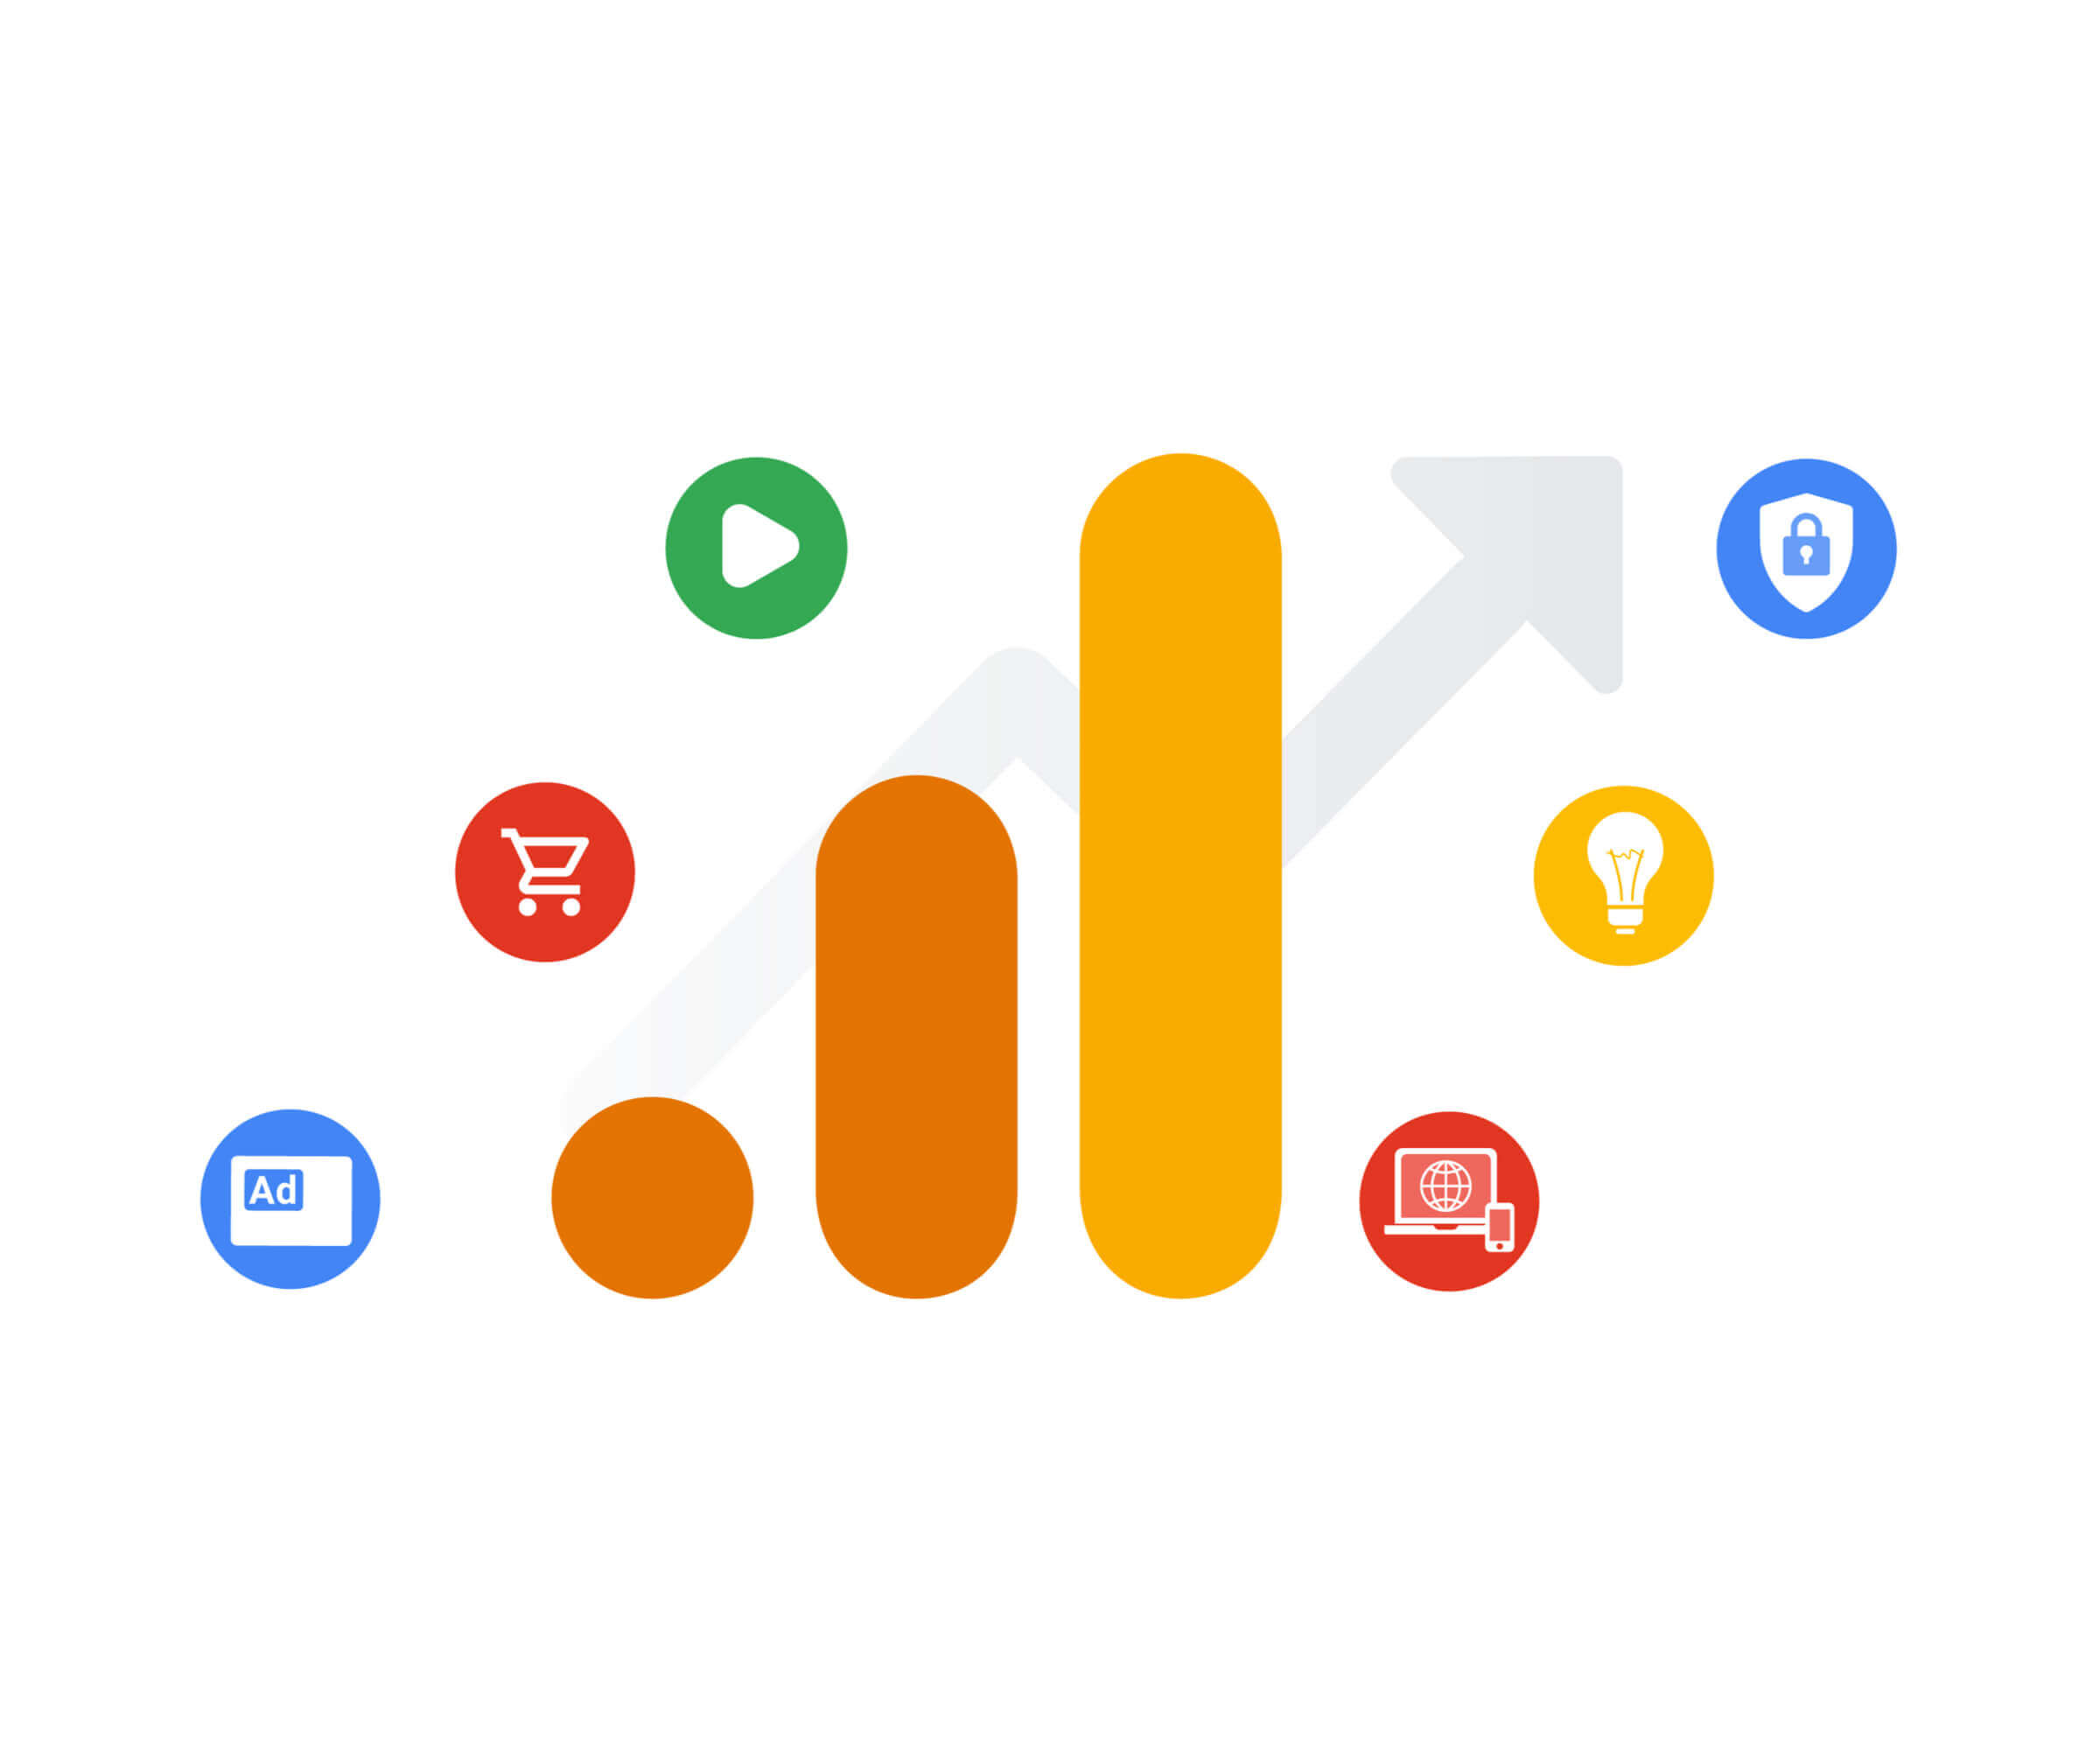 What Are The Differences Between Universal Analytics and Google Analytics 4?